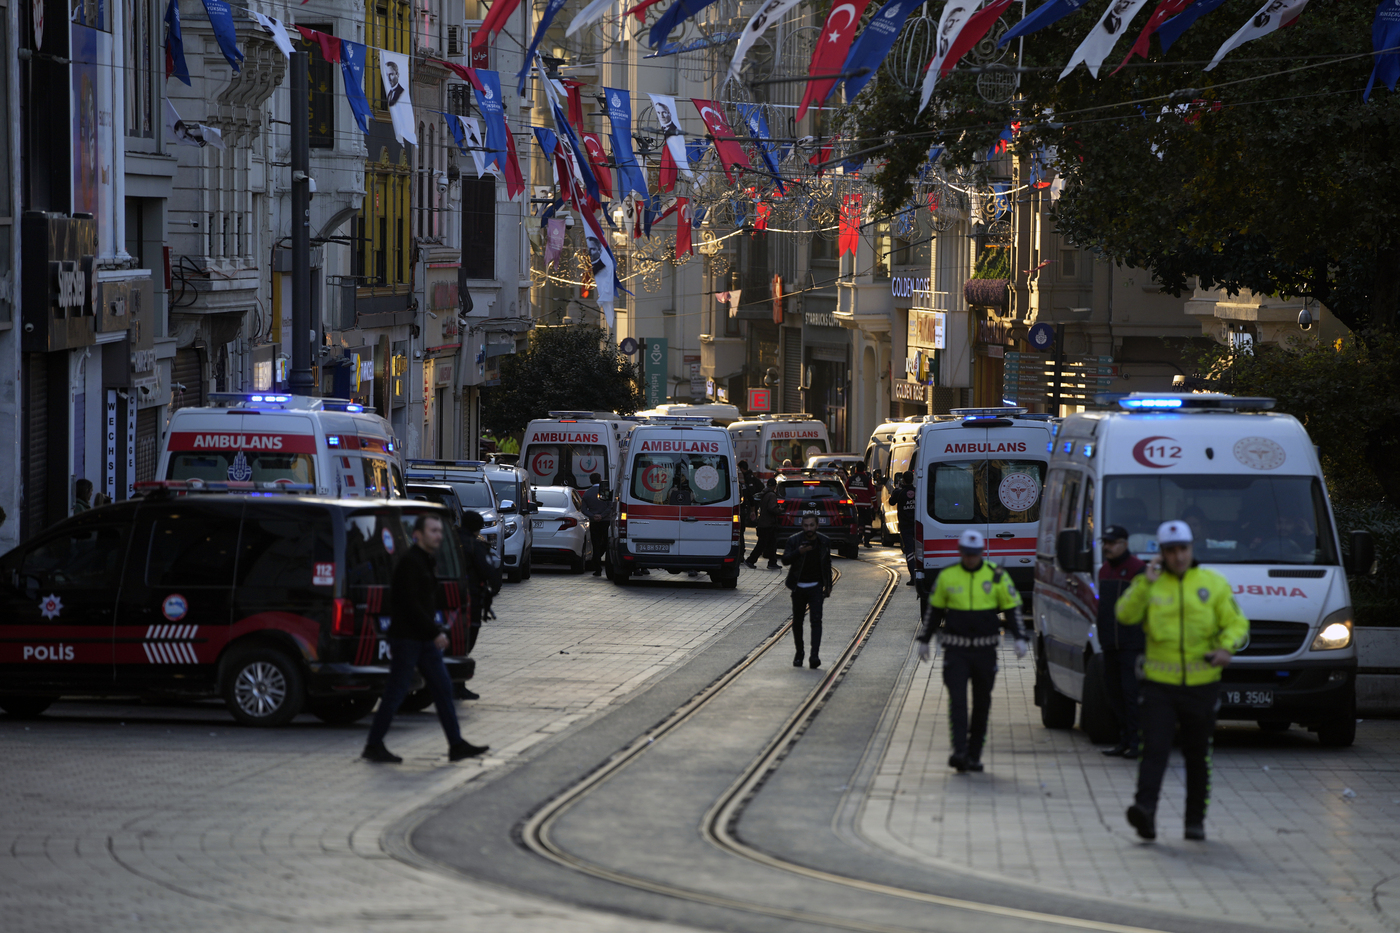 Police vehicles and ambulances are parked at the site of an explosion on Istanbul's popular pedestrian Istiklal Avenue in Istanbul, Turkey, Sunday, Nov. 13, 2022. Istanbul Gov. Ali Yerlikaya tweeted that the explosion occurred at about 4:20 p.m. (1320 GMT) and that there were deaths and injuries, but he did not say how many. The cause of the explosion was not clear. (AP Photo/Francisco Seco)